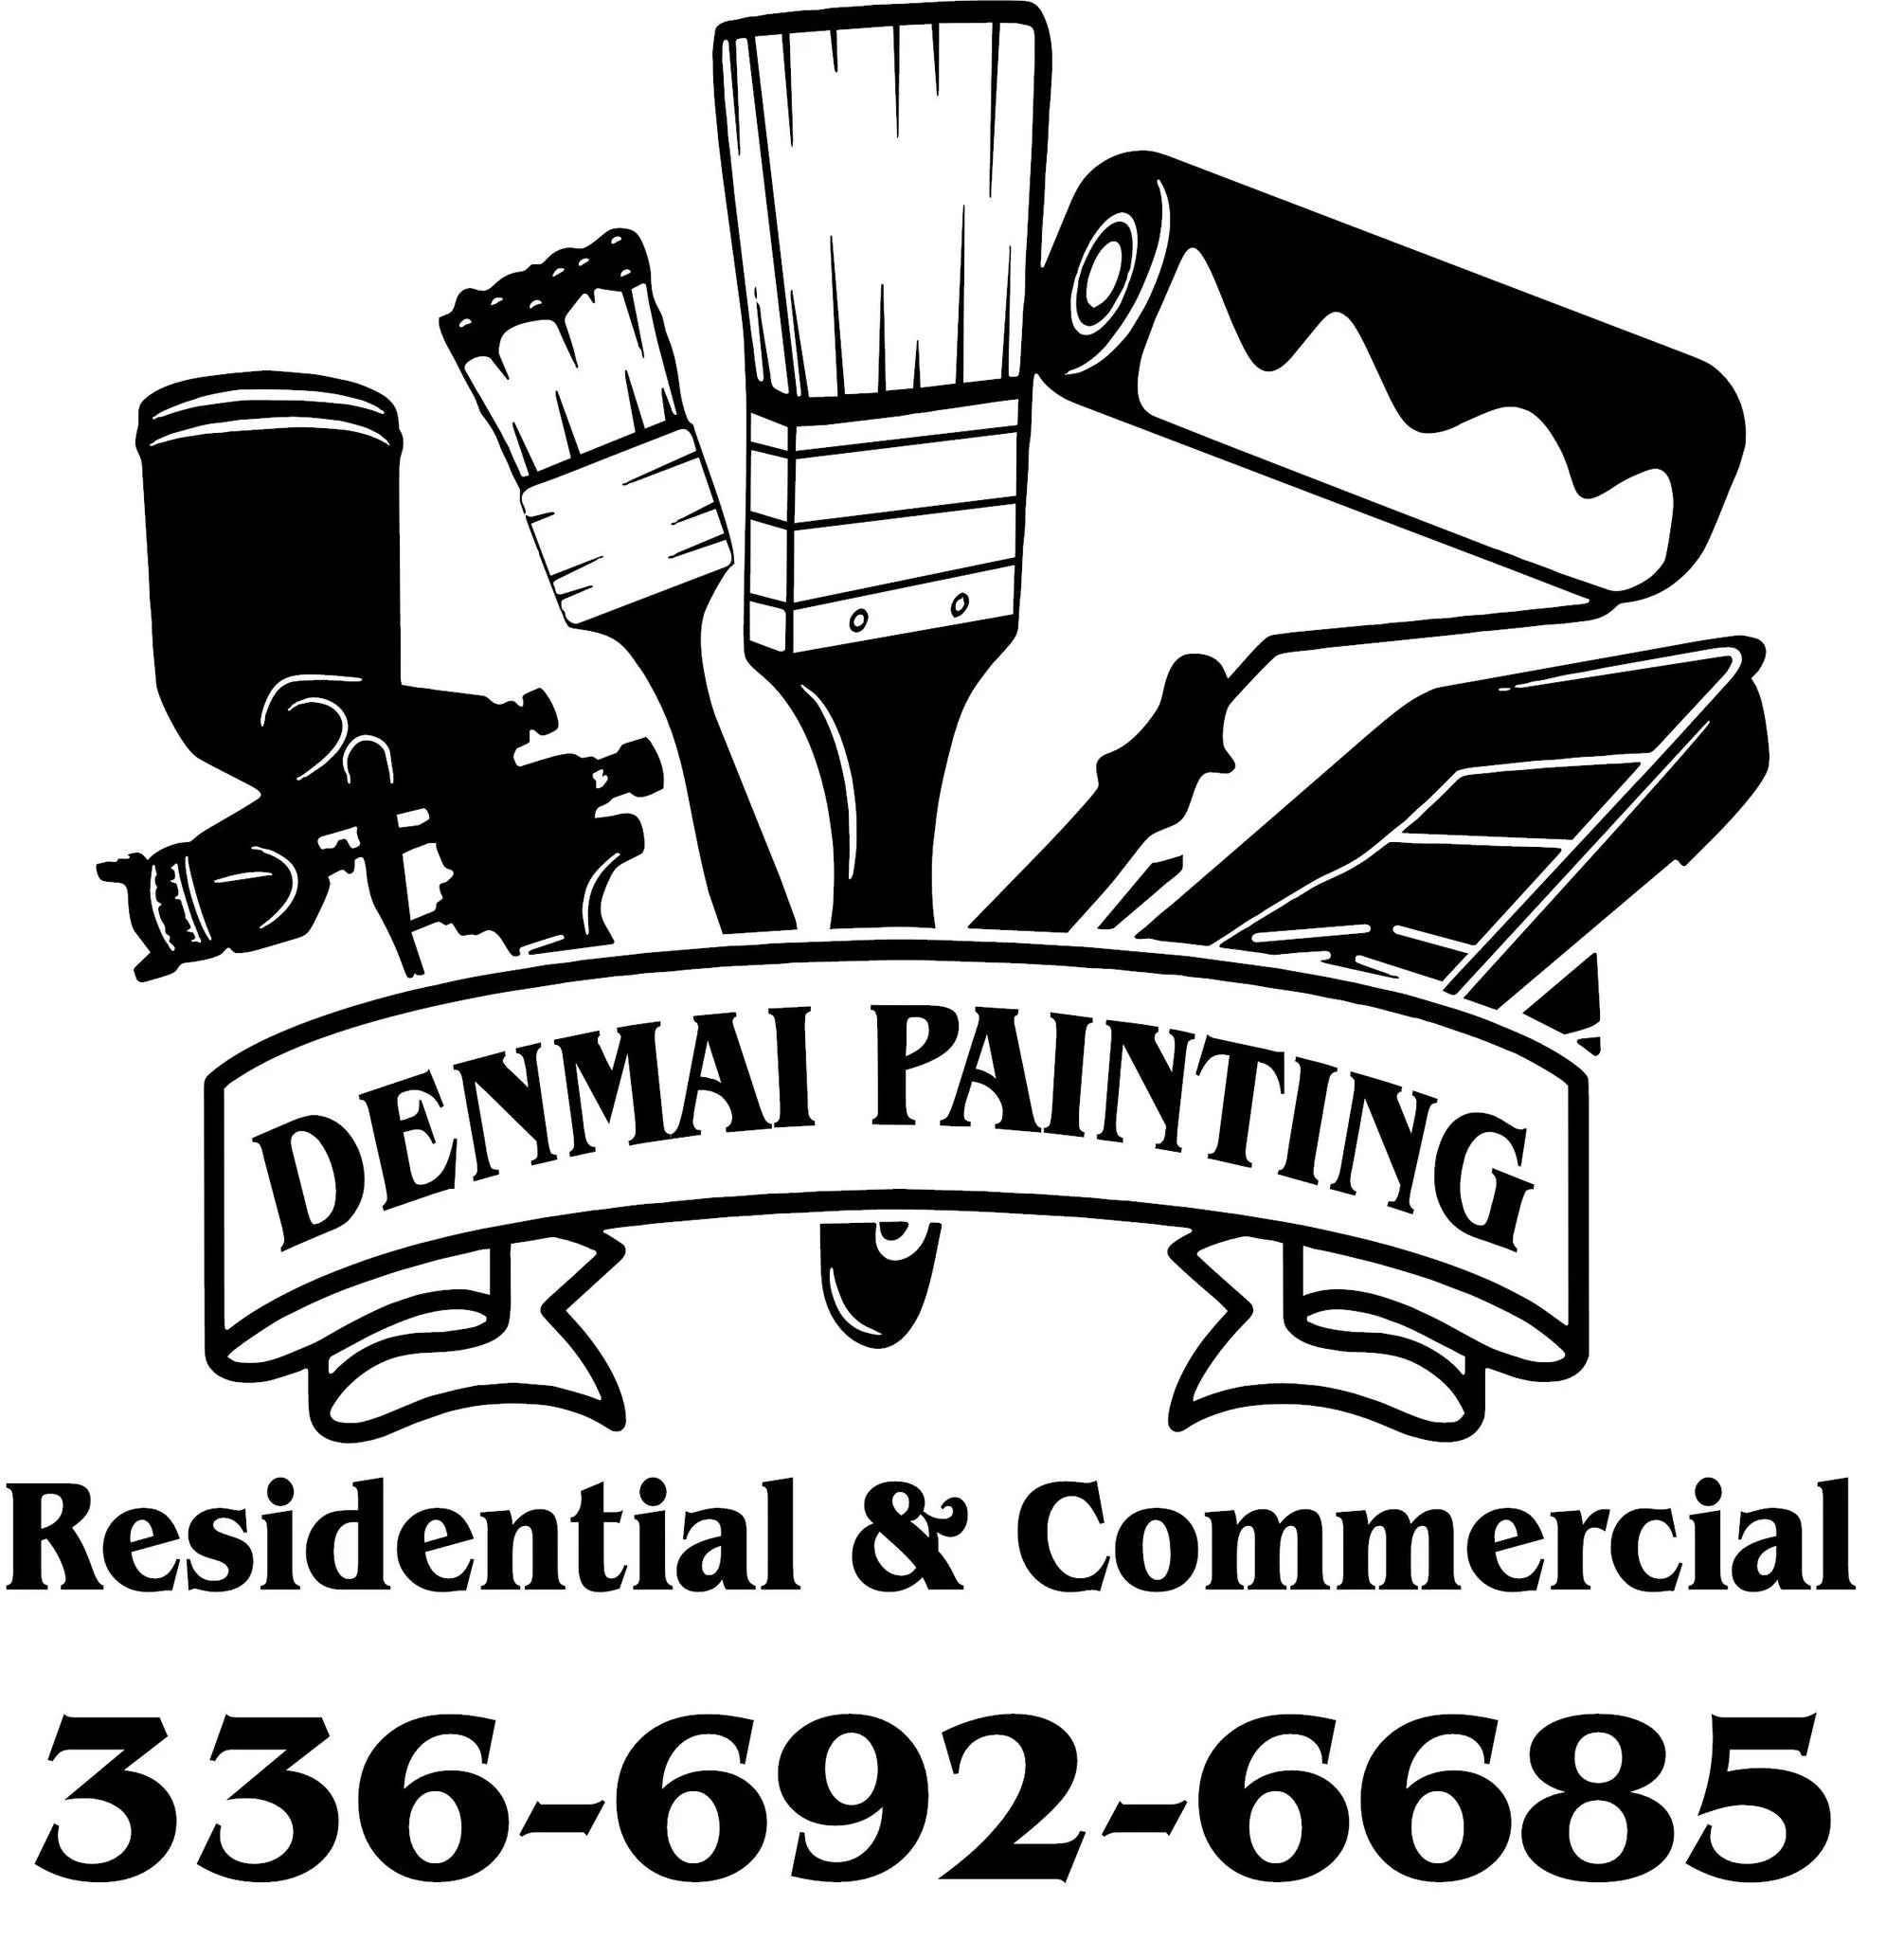 Exterior Painting for Denmai Painting in Winston Salem, NC